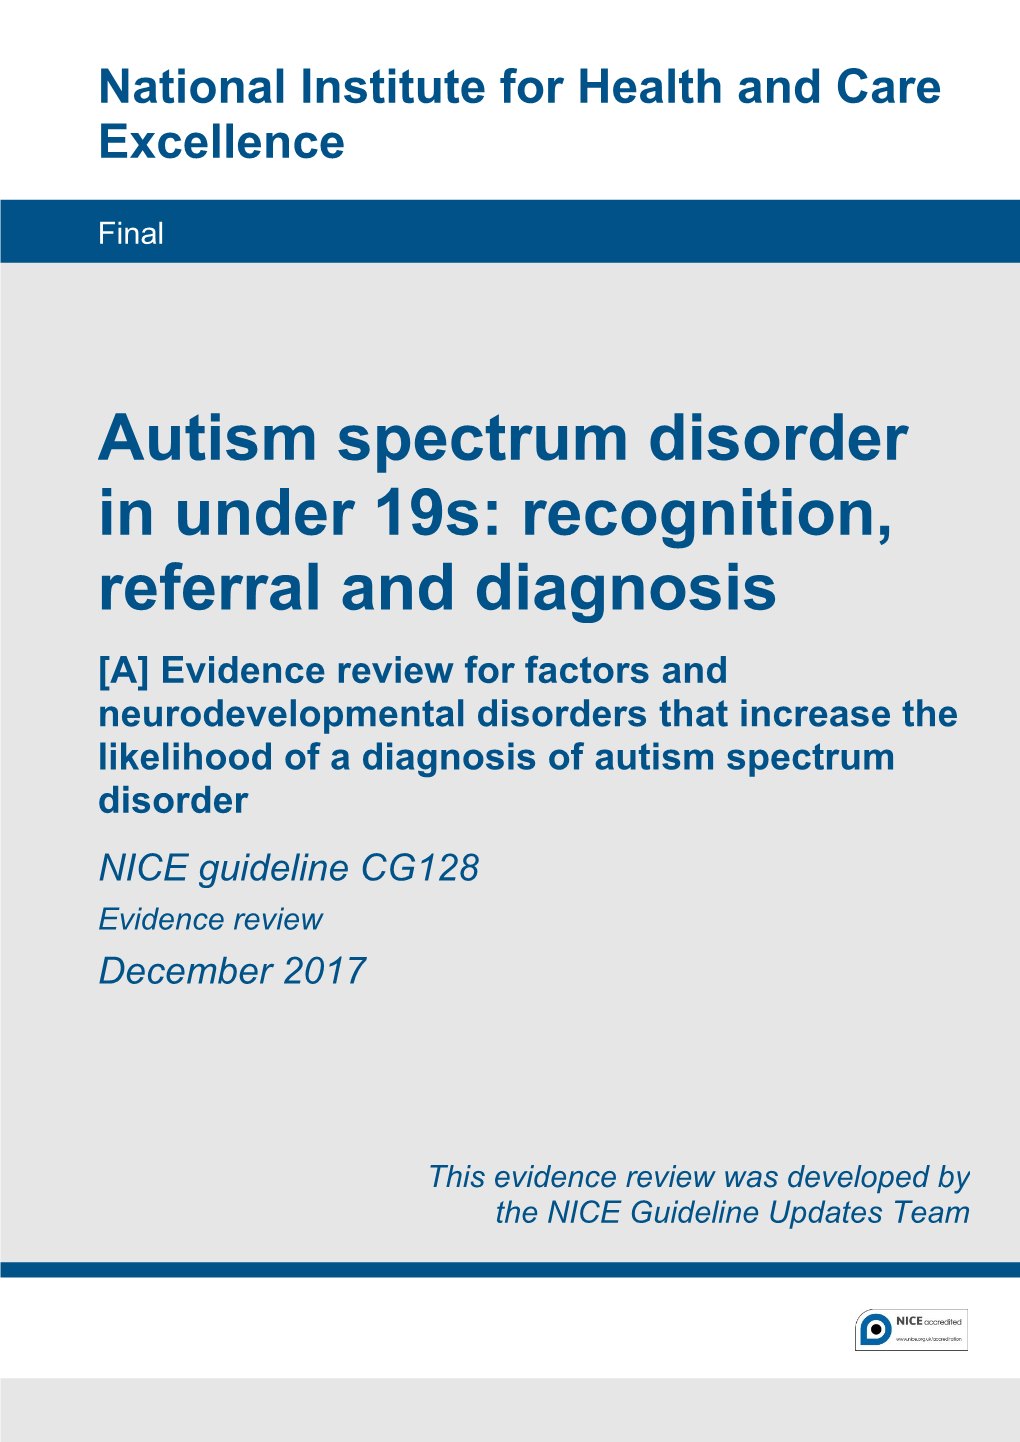 Evidence Review A: Factors and Neurodevelopmental Disorders That